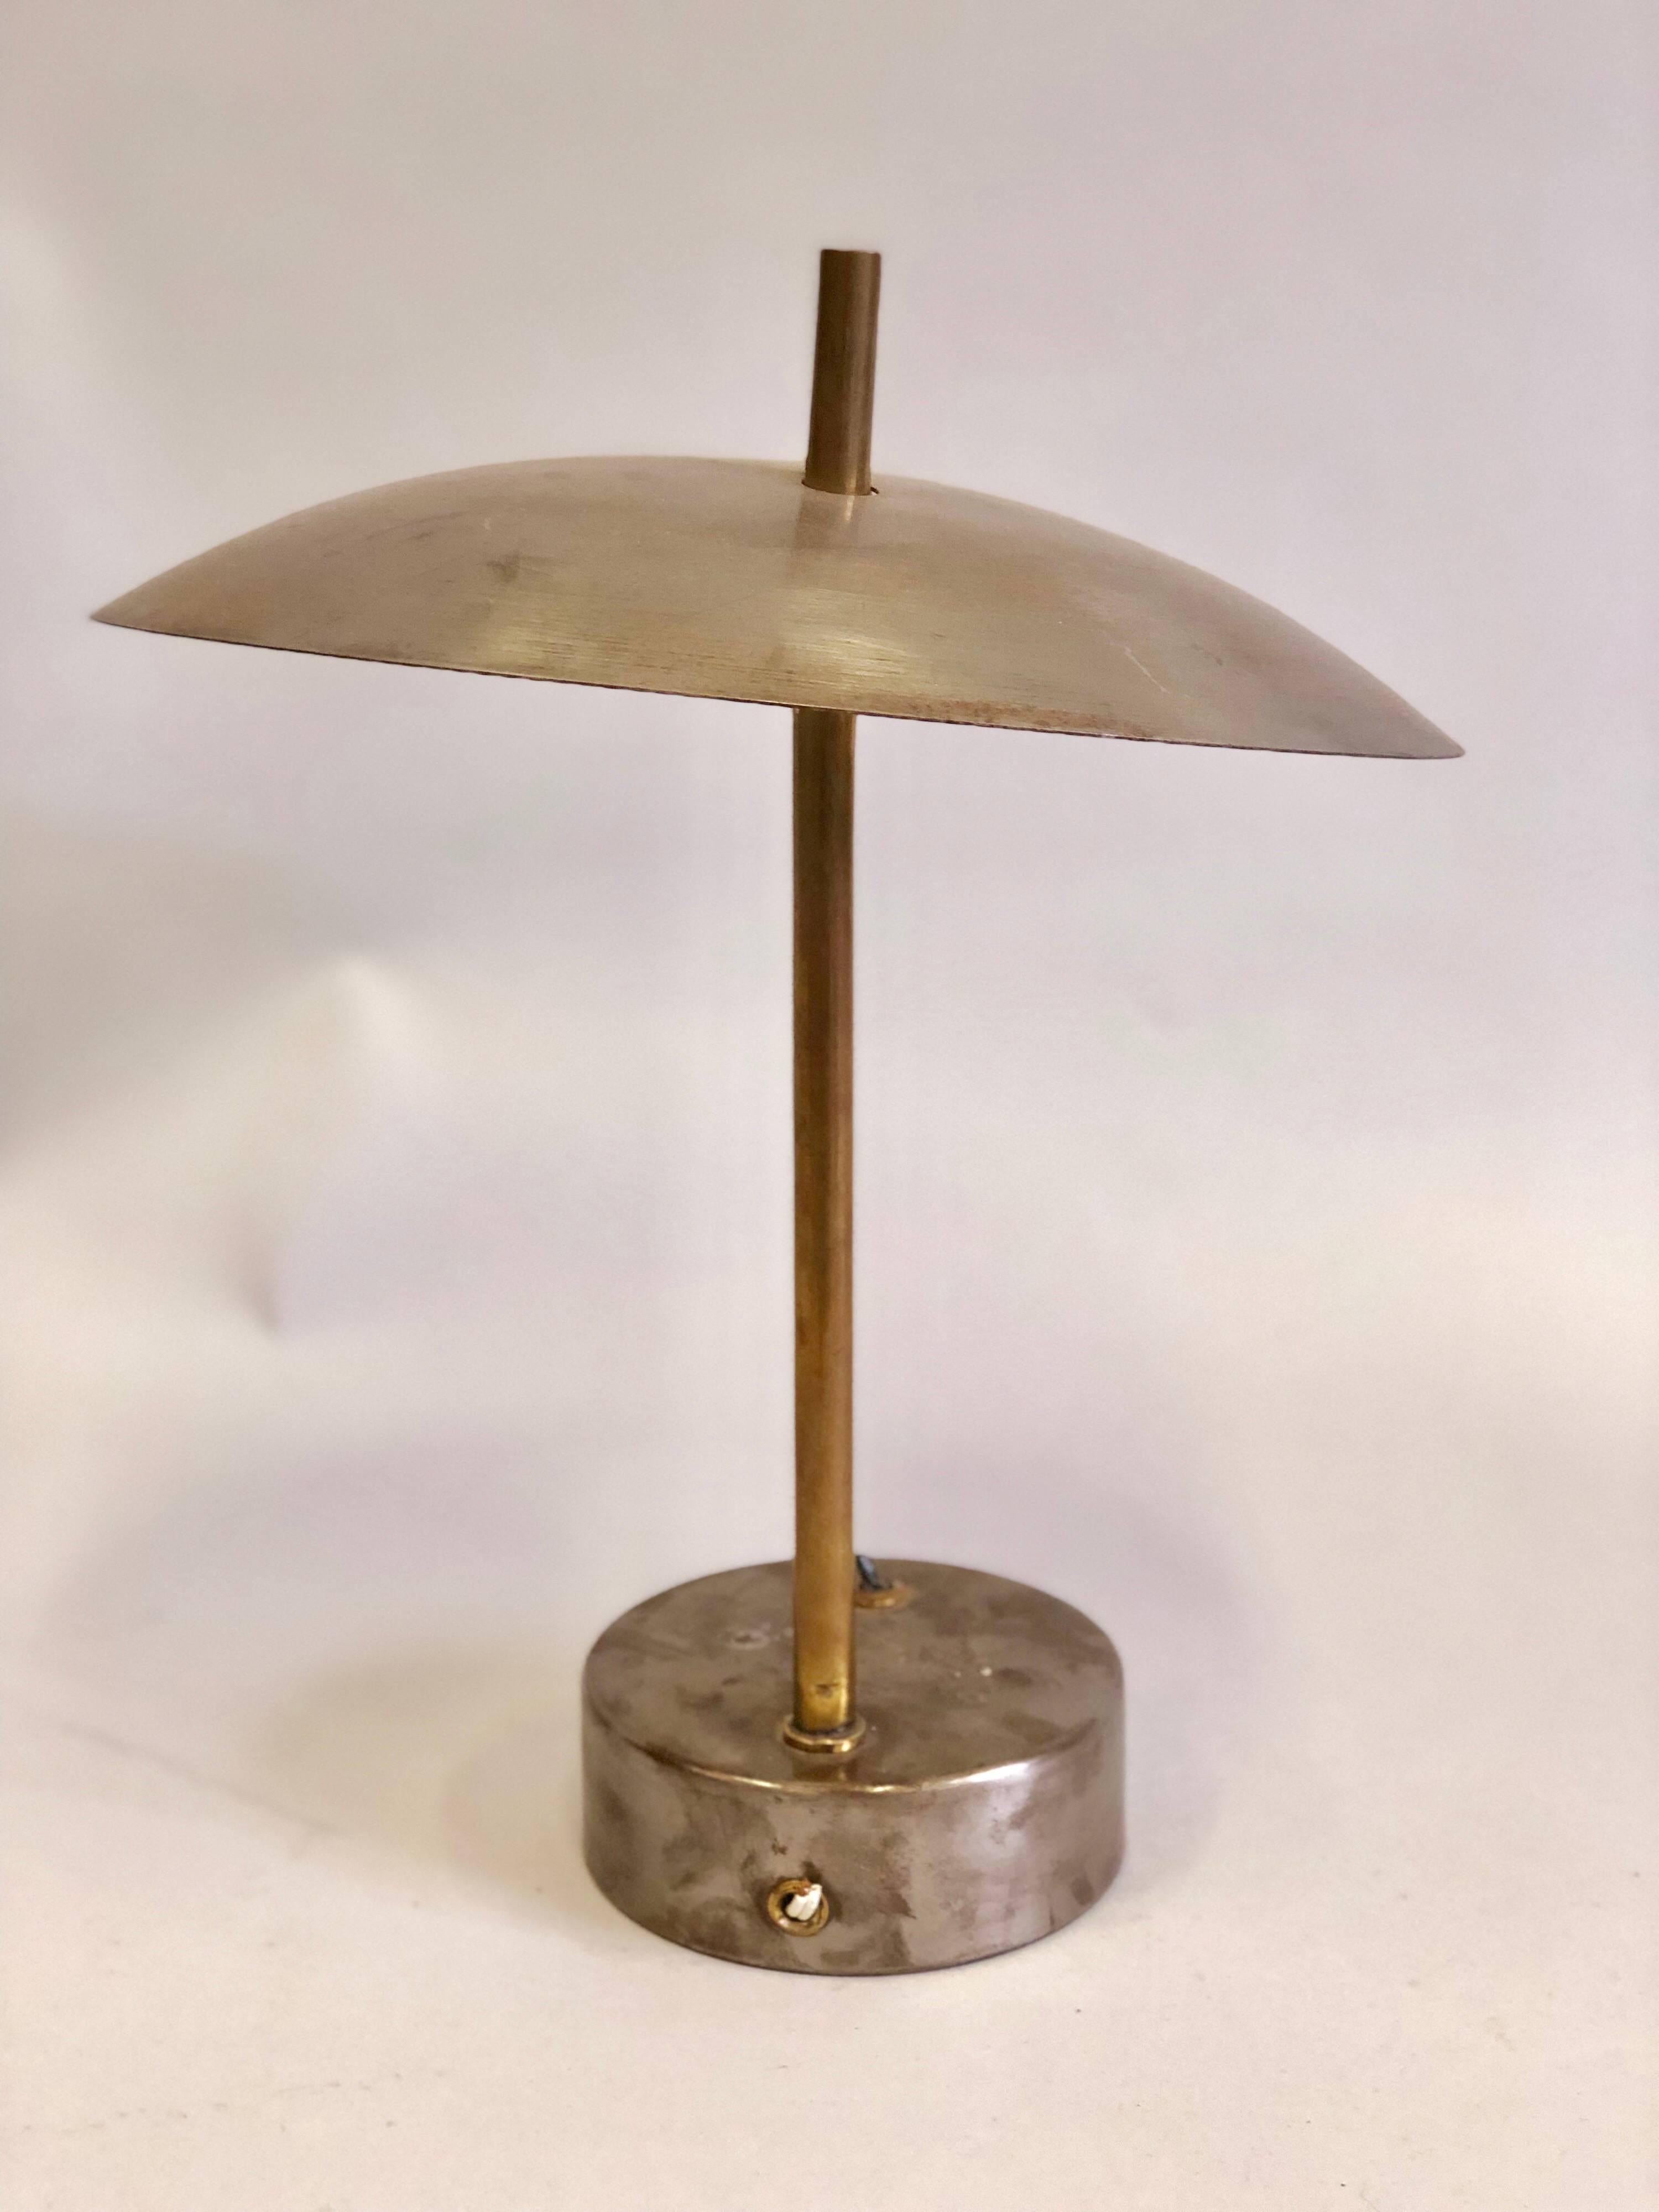 French Pair of Mid-Century Modern Industrial Steel and Brass Desk or Table Lamps, 1950